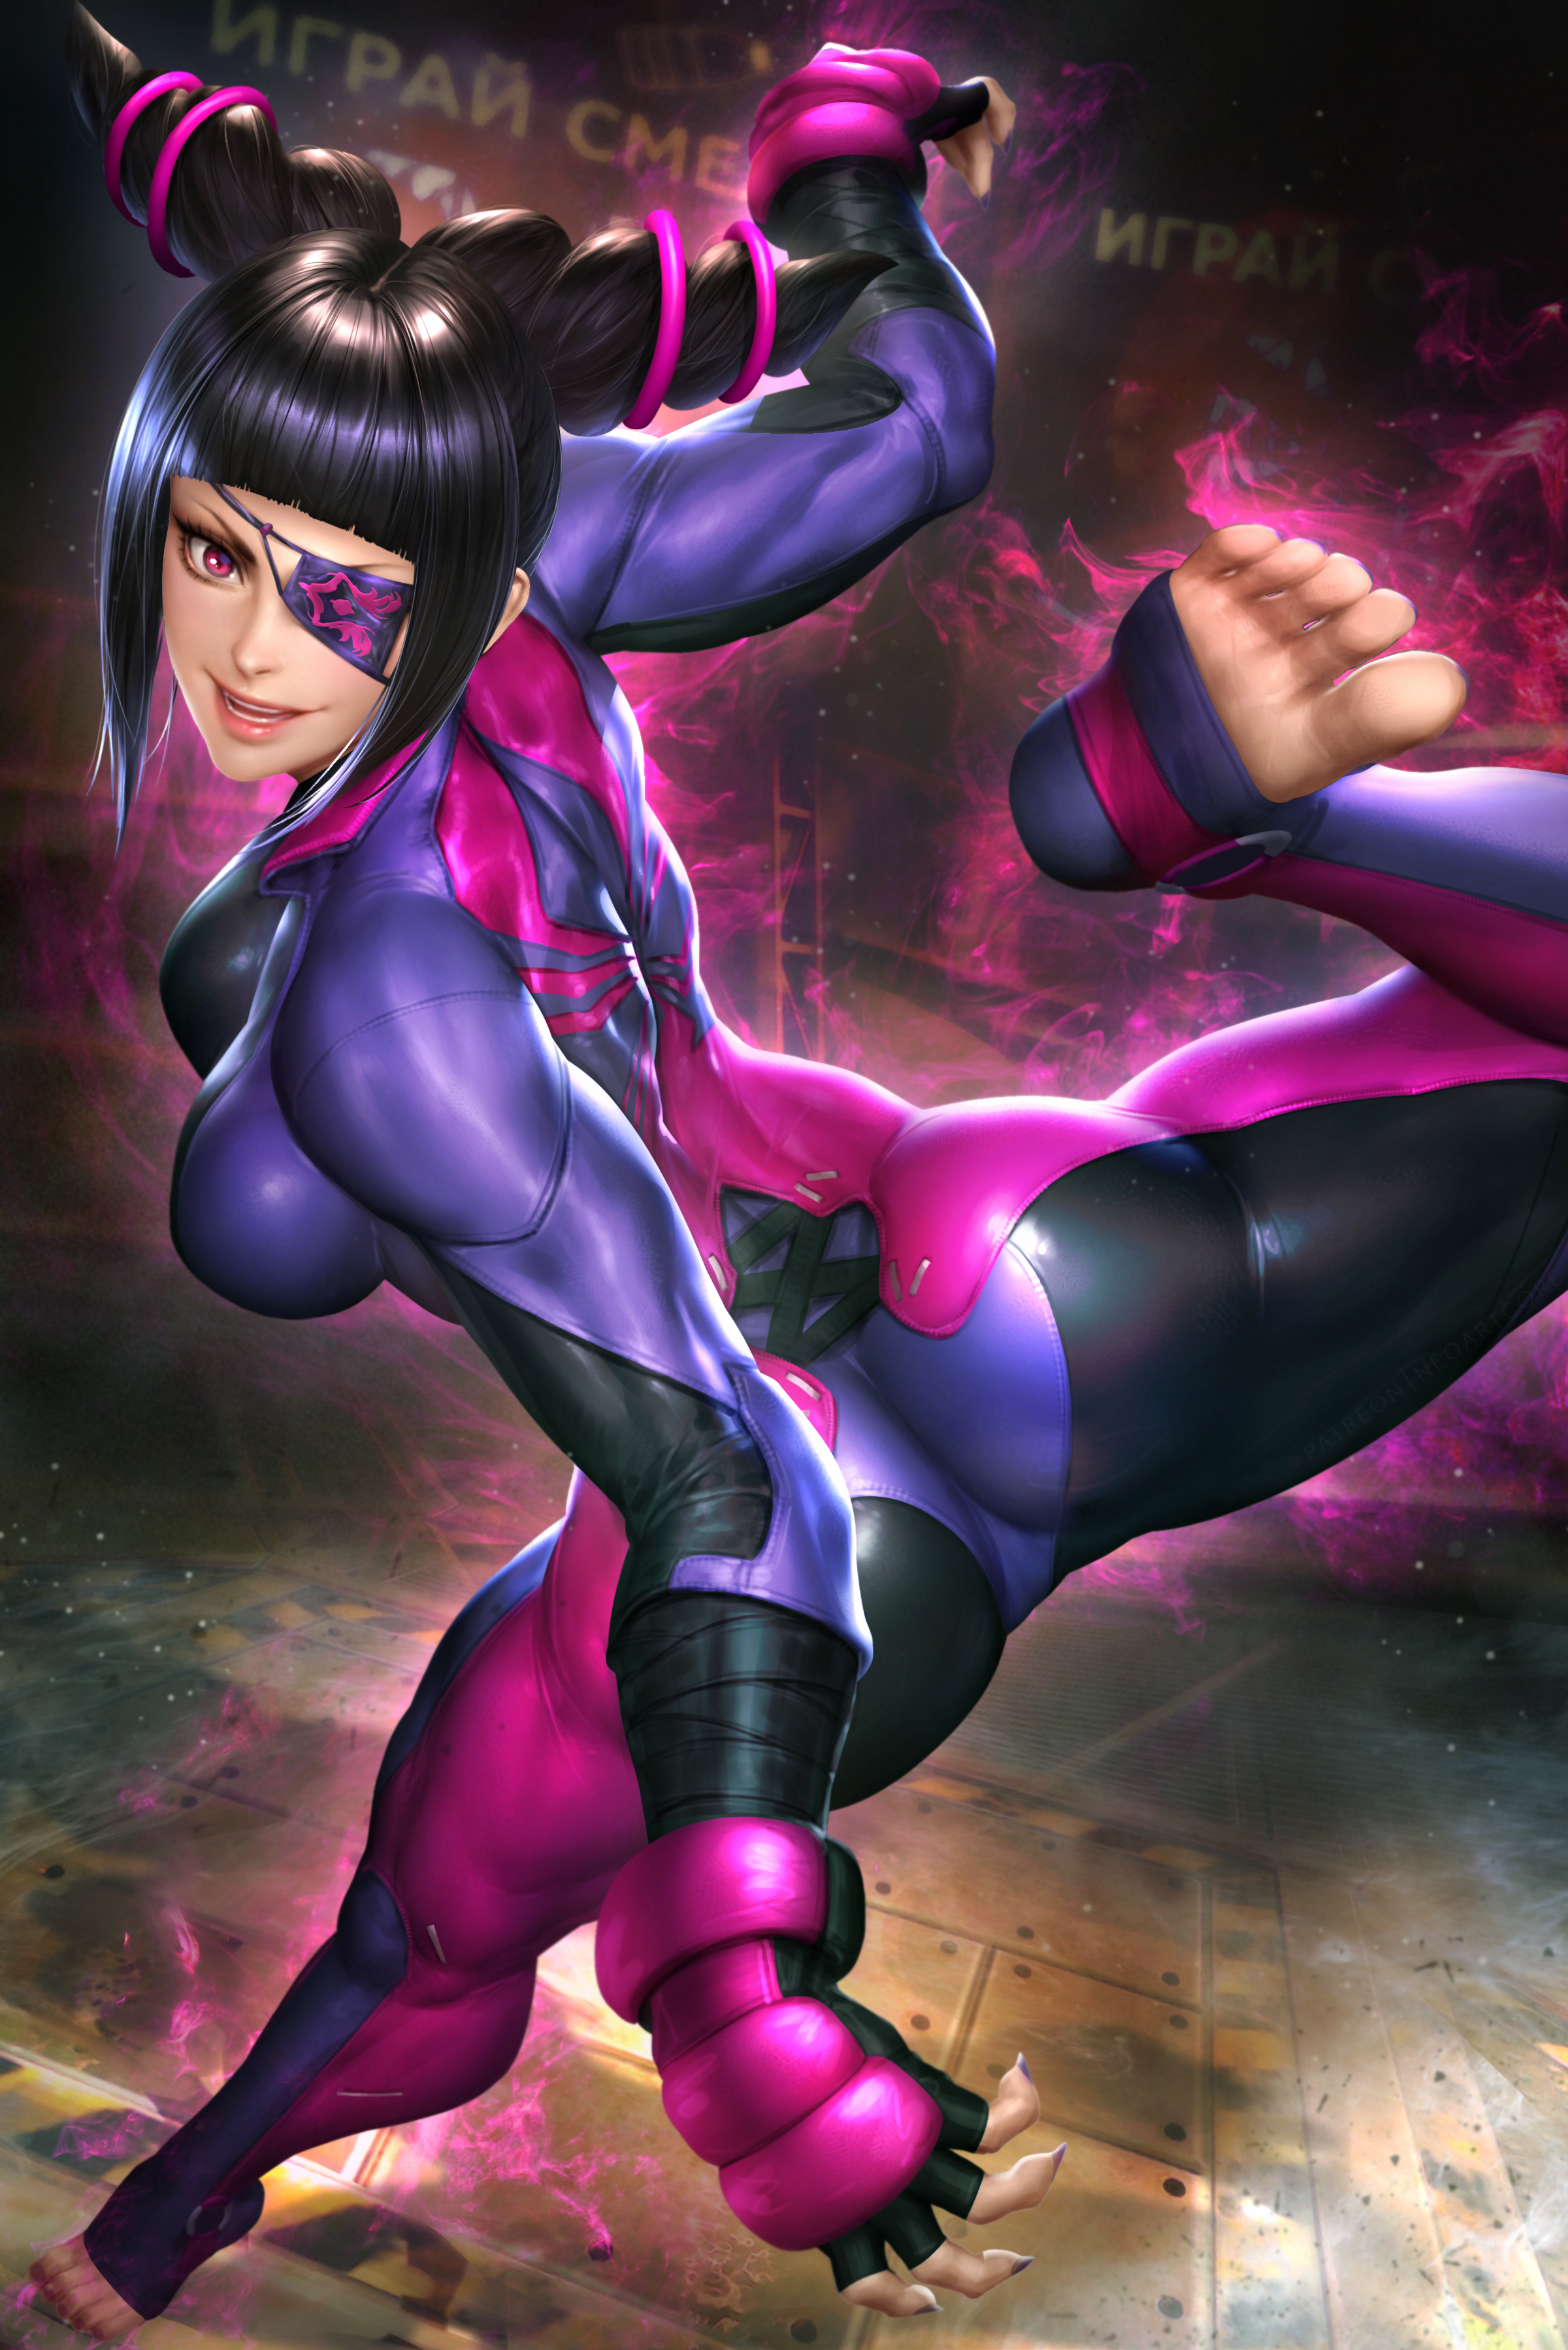 General 2400x3597 Street Fighter video games video game girls Capcom portrait display looking at viewer smiling bangs eyepatches bodysuit jumpsuit tight clothing ass artwork drawing illustration fan art NeoArtCorE (artist) video game warriors spread legs Han Juri